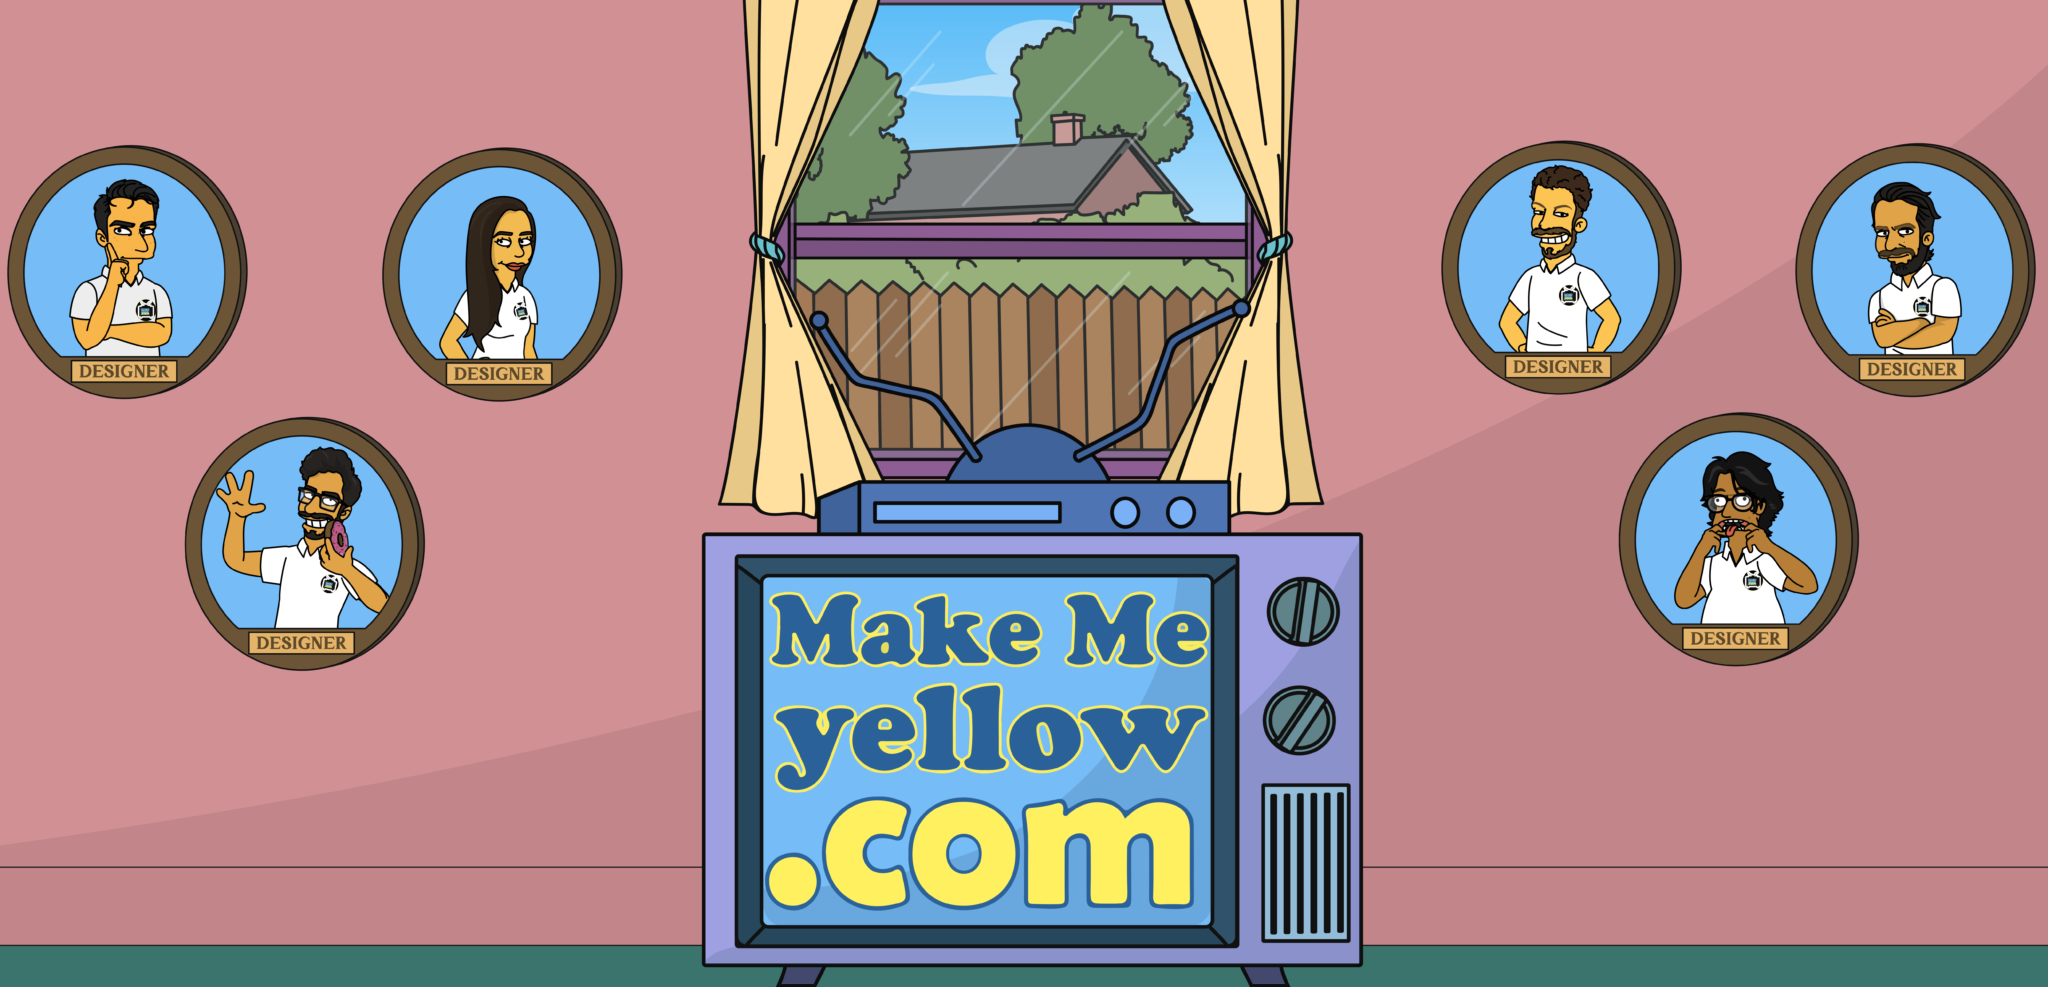 BEST Simpsons Creator Service in 2023 ⭐️ Make Me Yellow